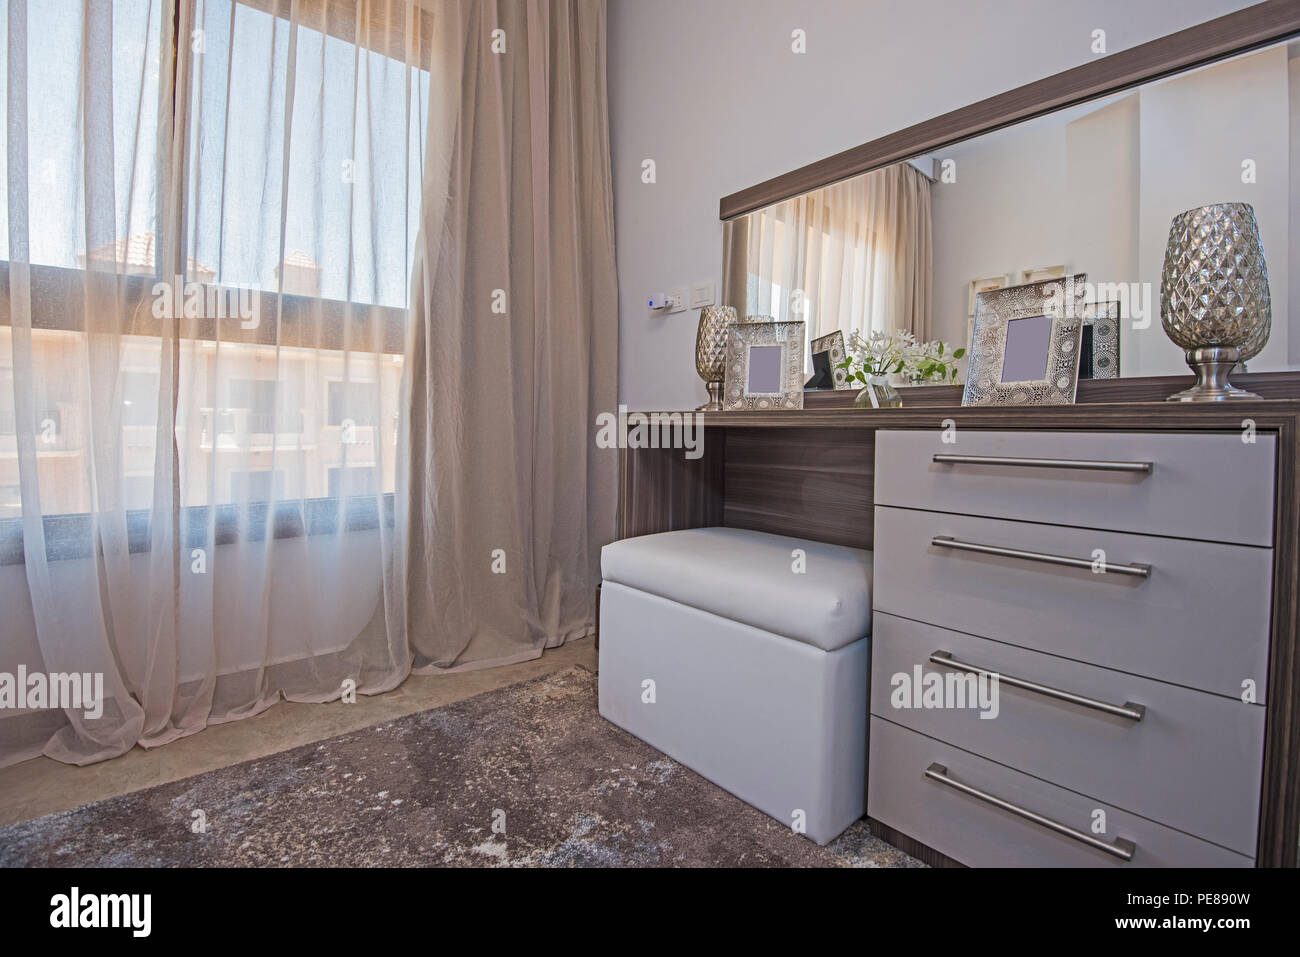 Interior design decor furnishing of luxury show home bedroom with dressing table and window Stock Photo